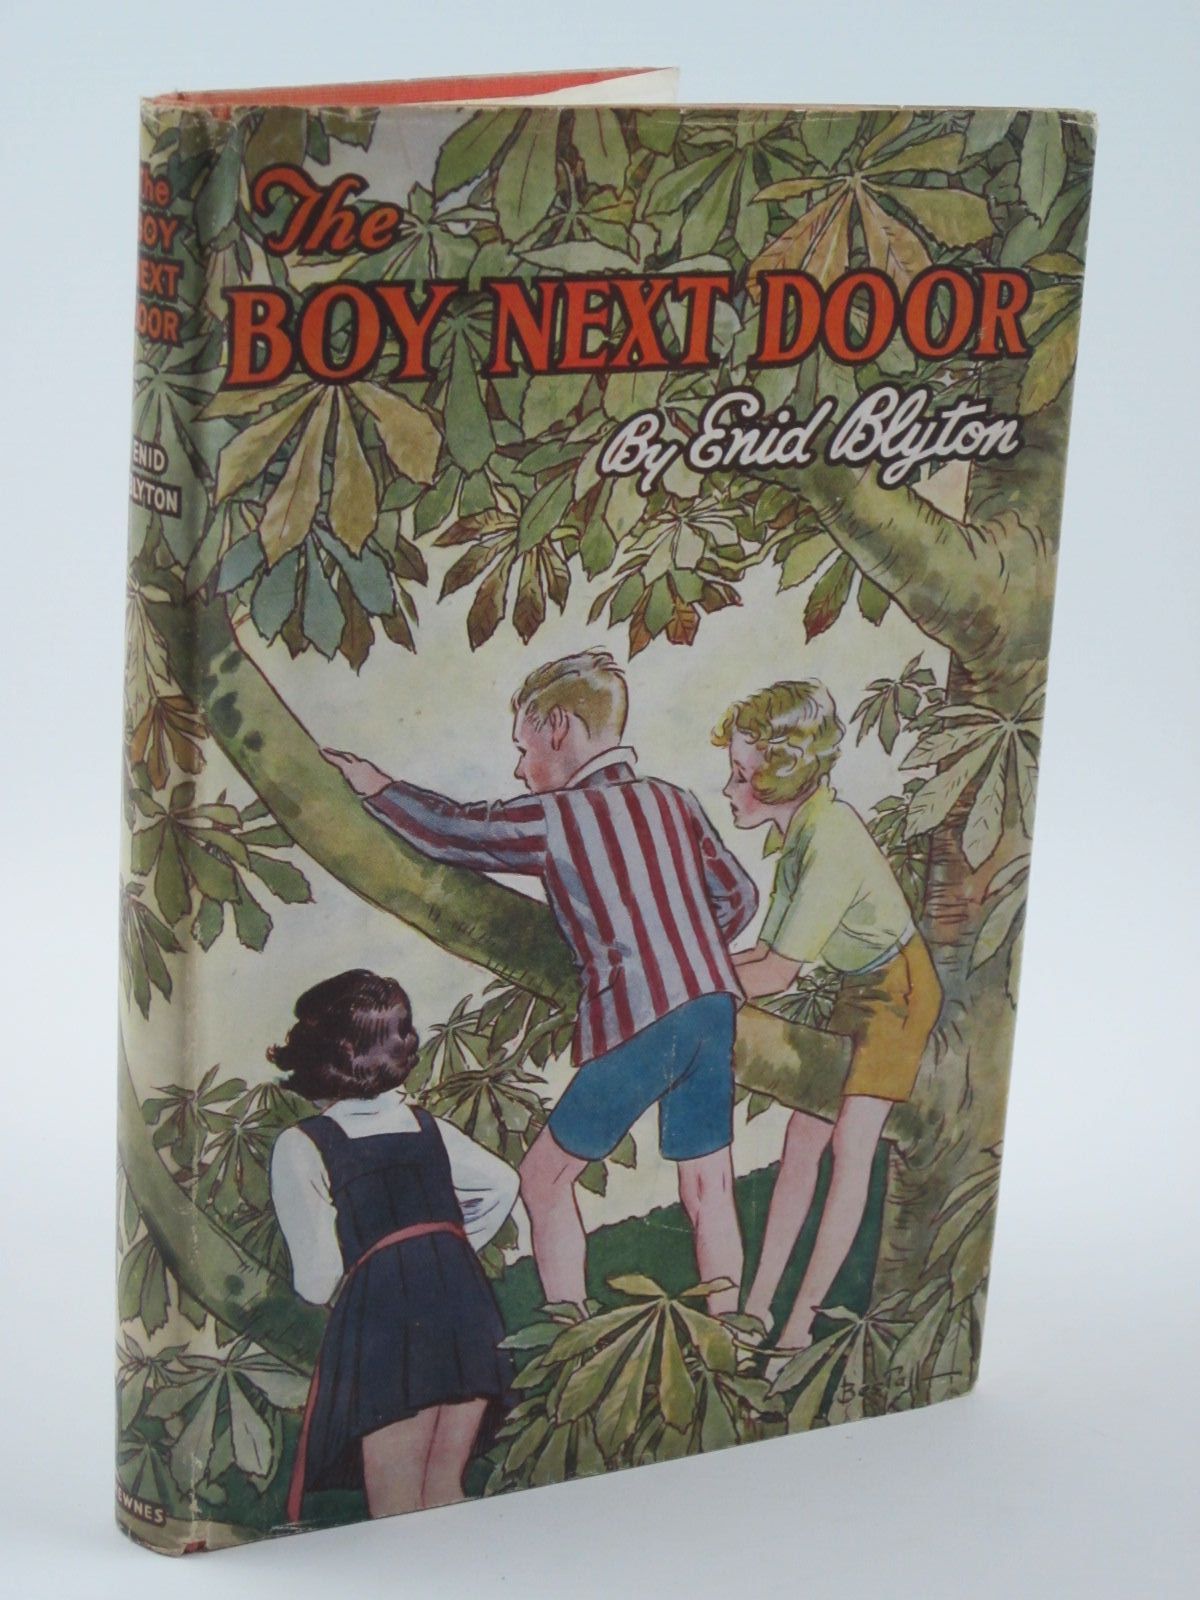 Cover of THE BOY NEXT DOOR by Enid Blyton